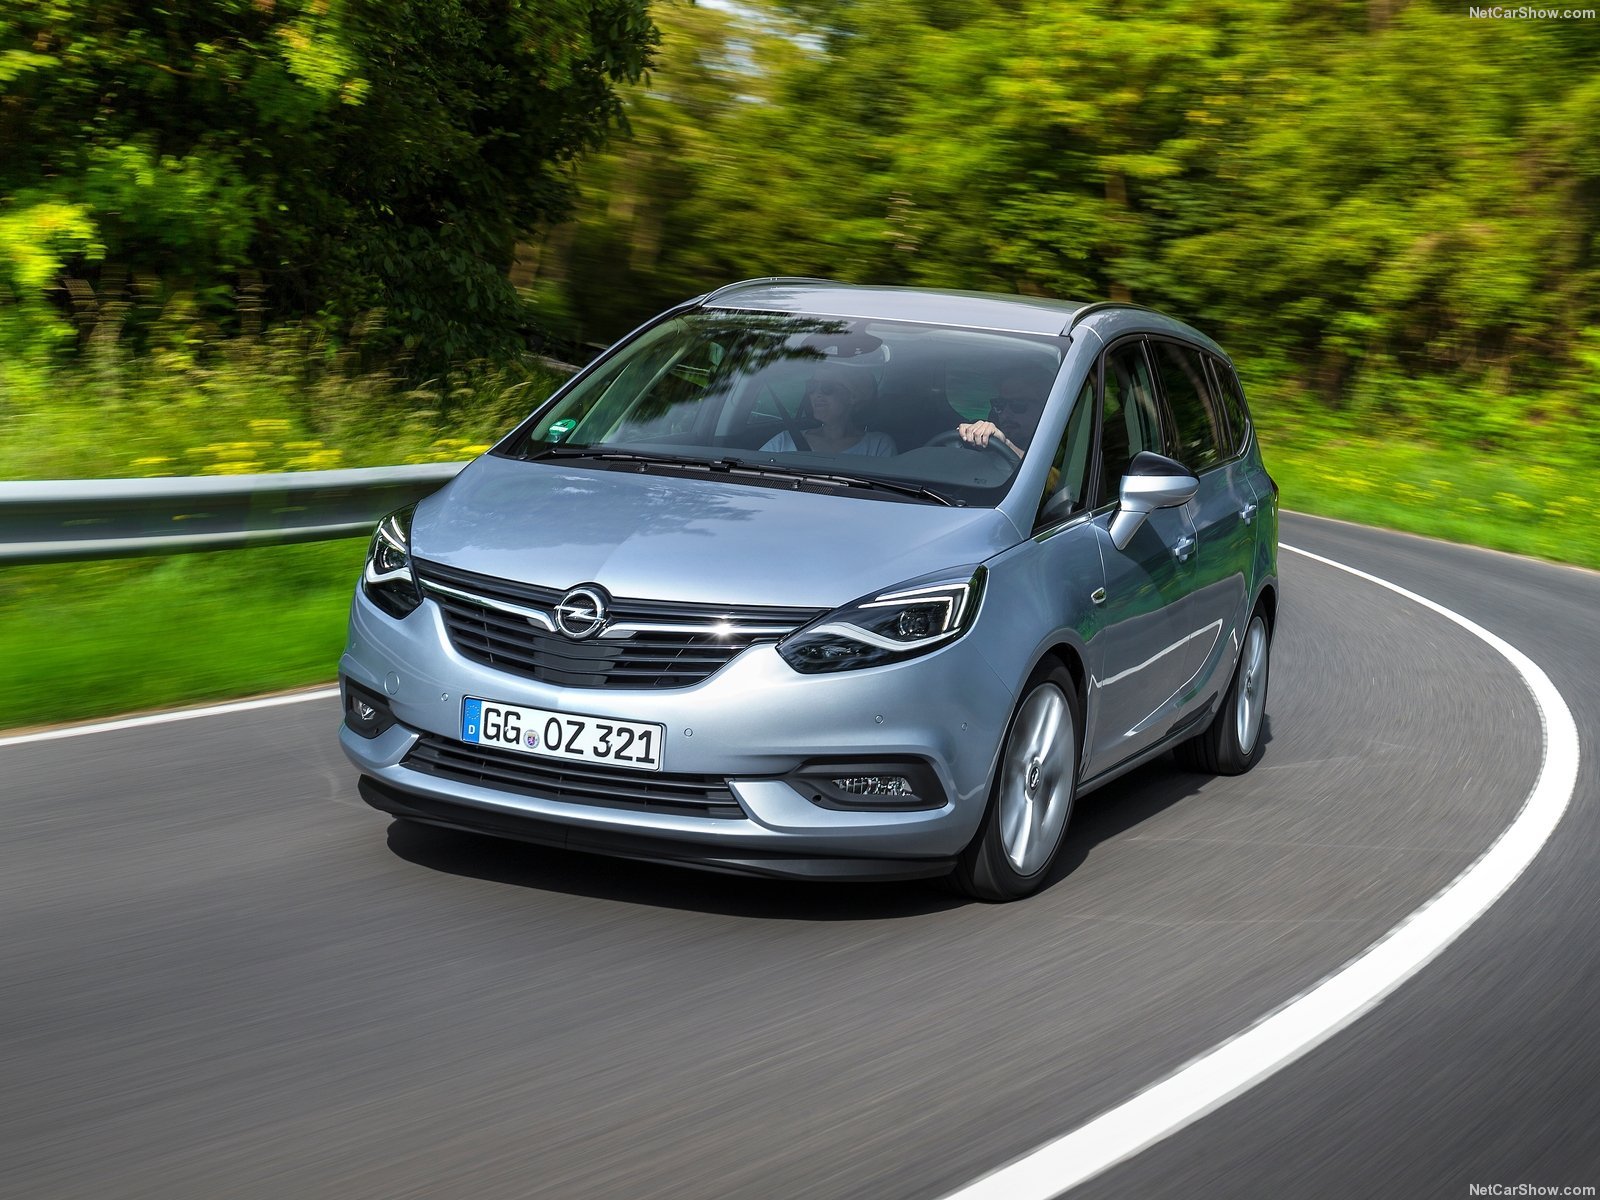 Opel Zafira Cars 2016 Wallpapers Hd Desktop And Mobile Backgrounds 9296